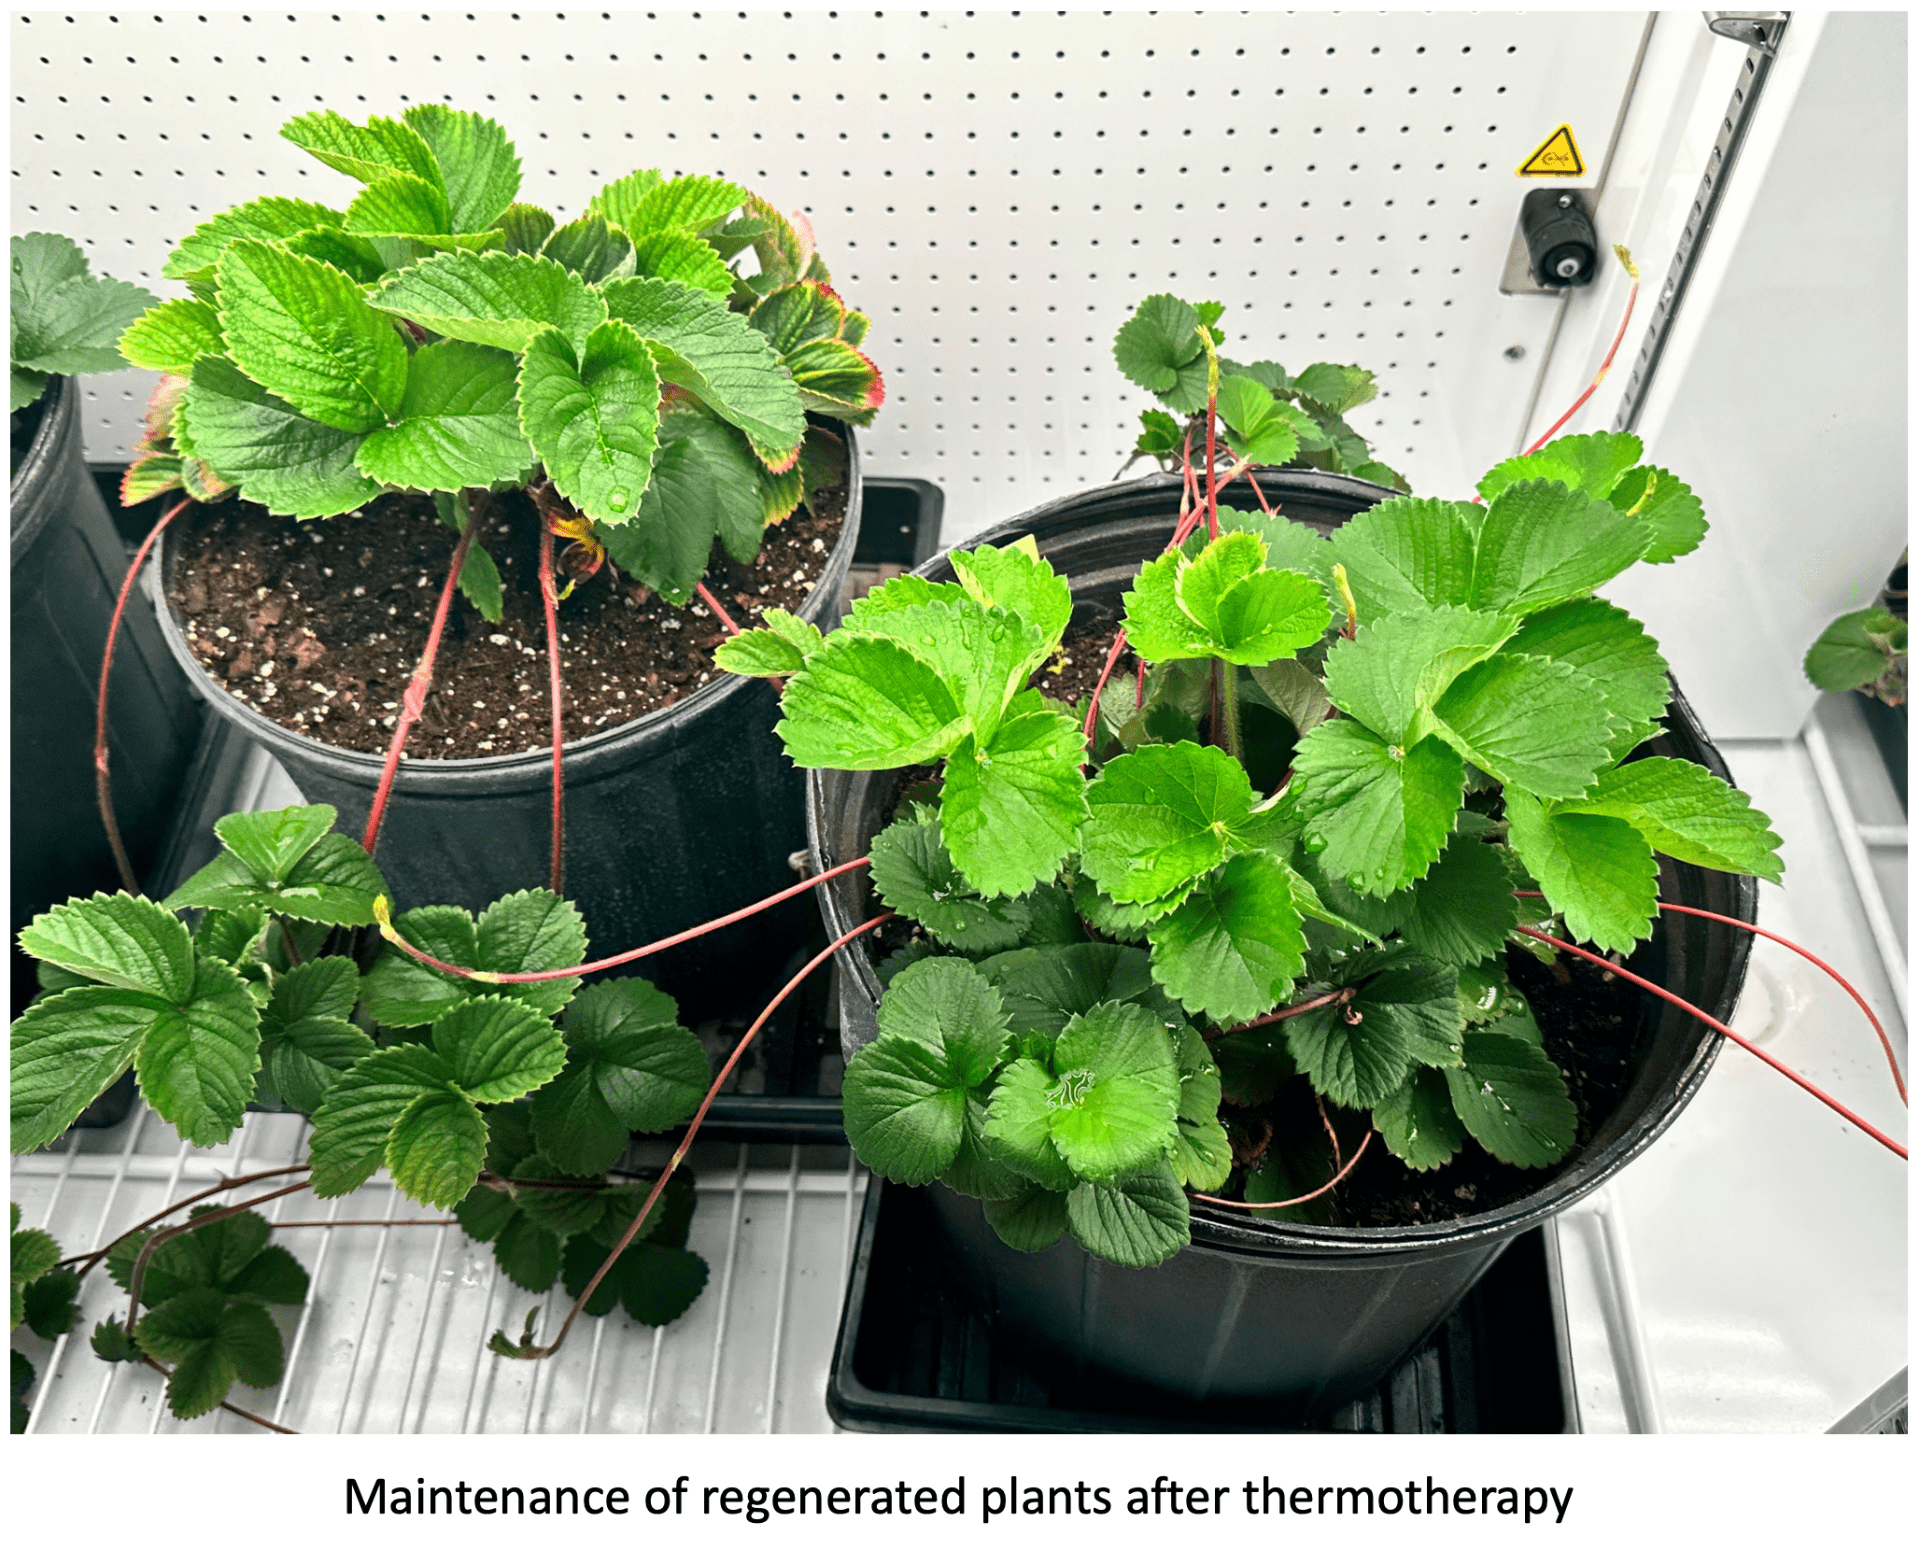 Maintenance of regenerated plants after thermotherapy